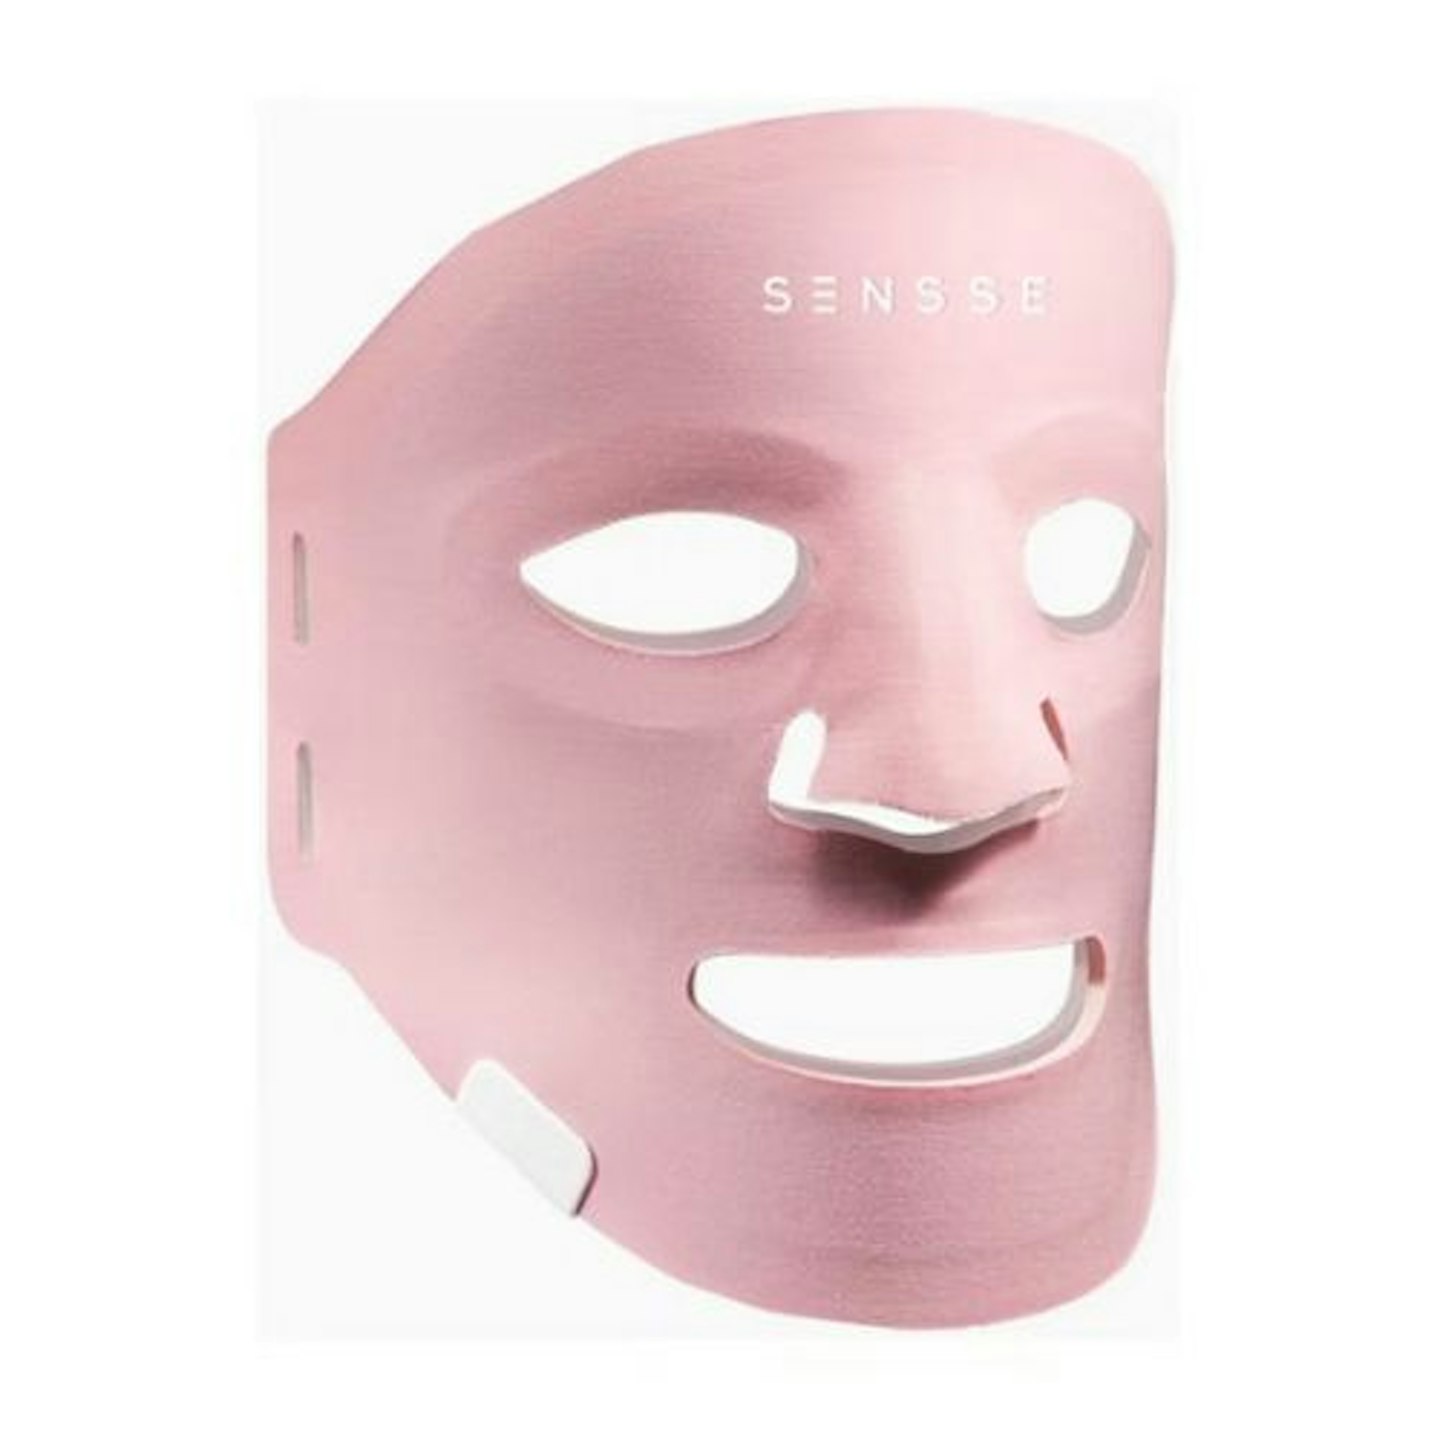 SENSSE Professional LED Light Therapy Face Mask